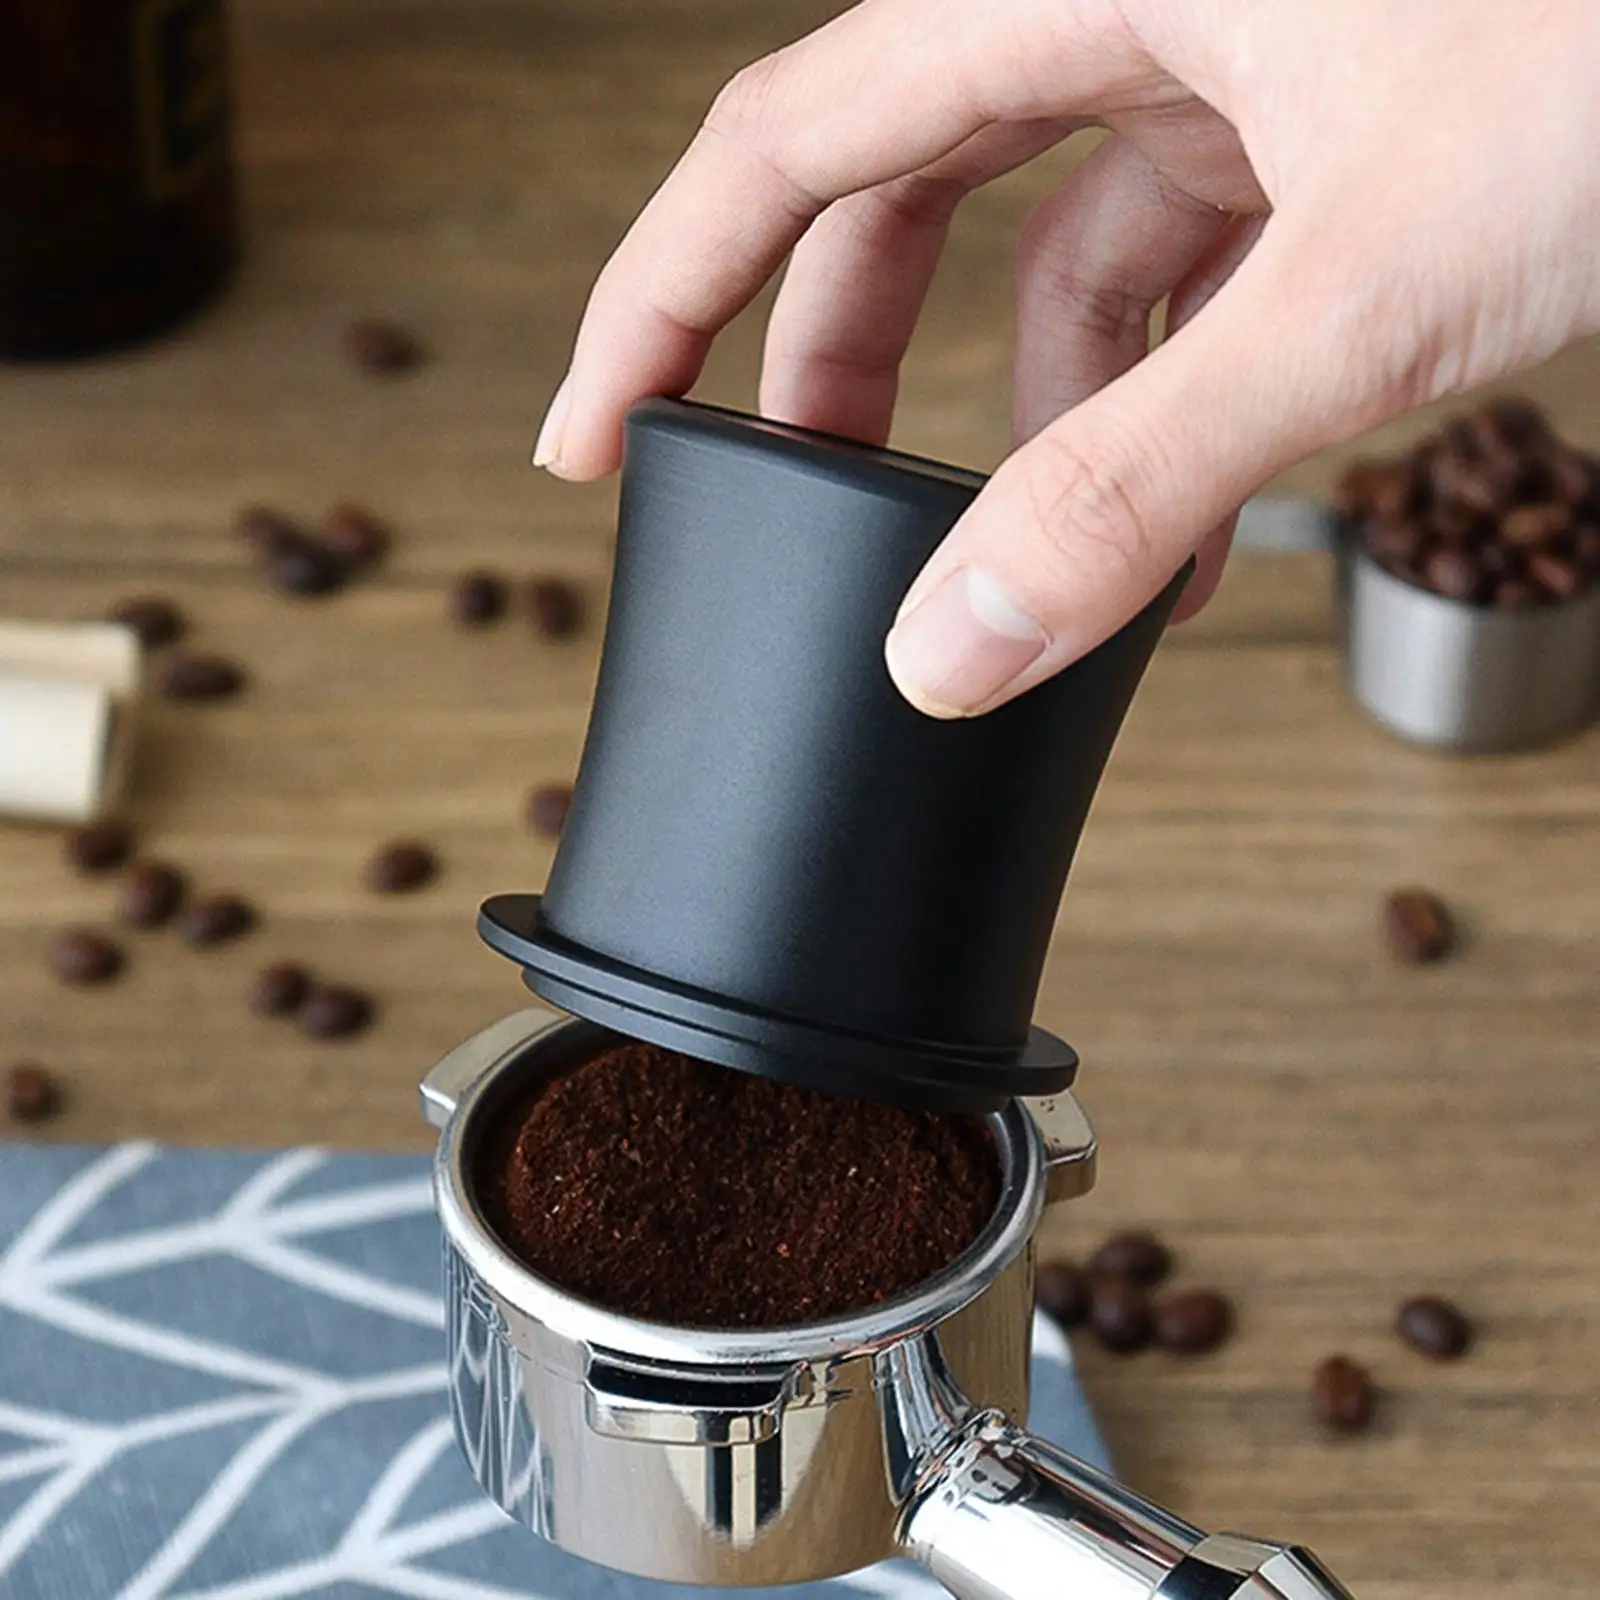 Portafilter Dosing Cup Coffee feeder Part Professional for Daily Use